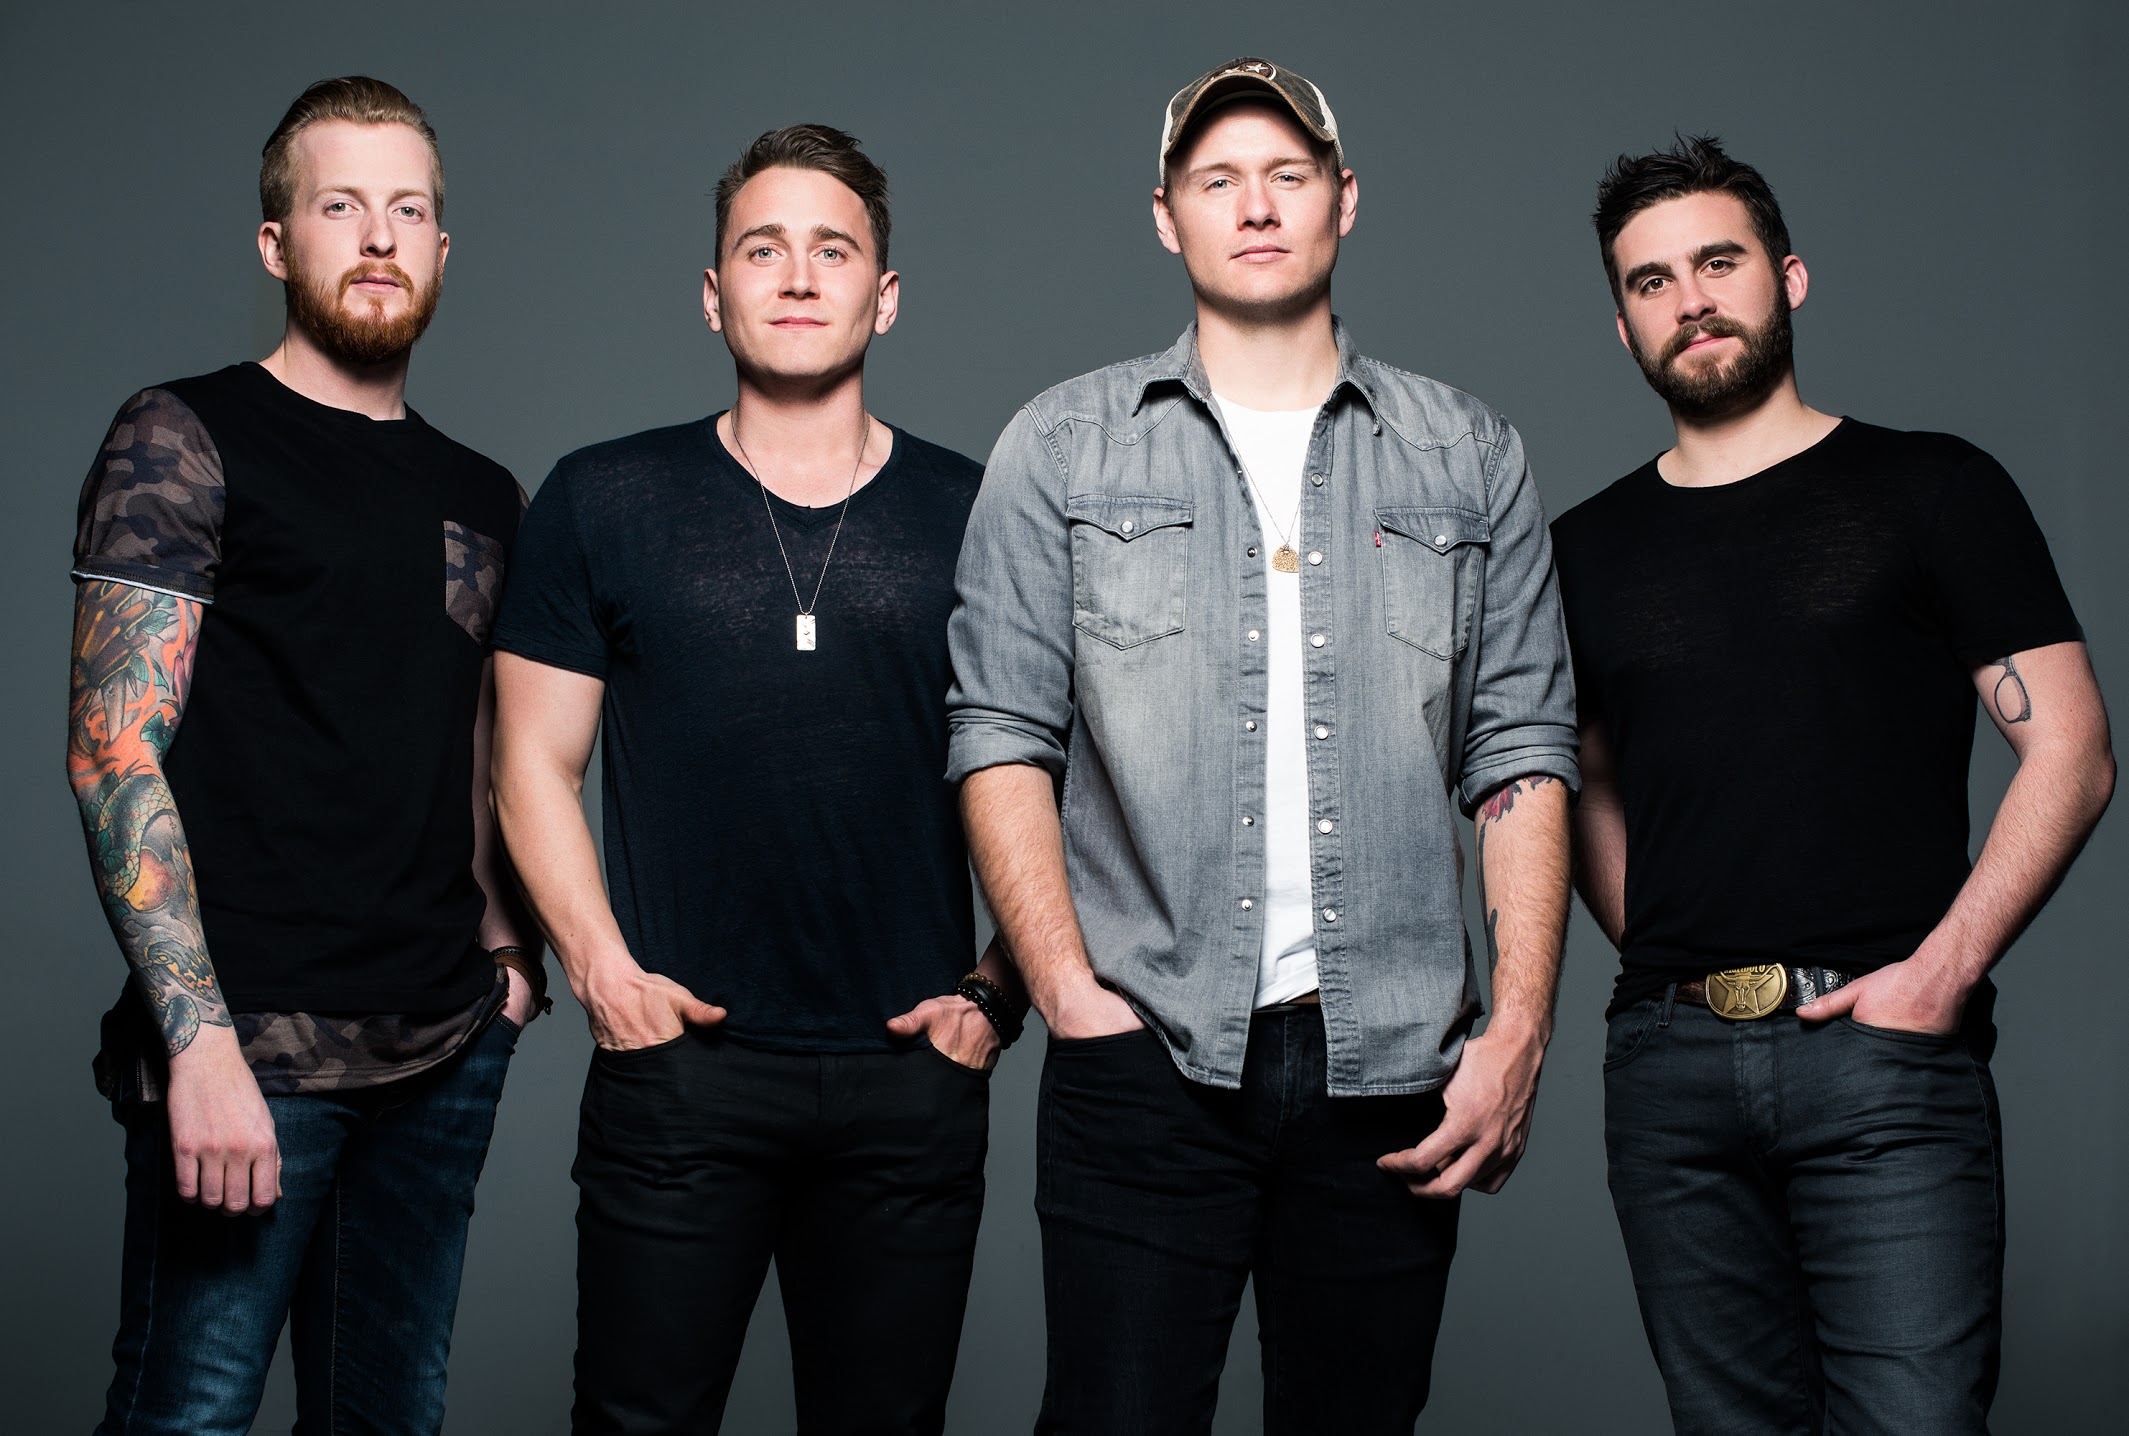 James Barker Band Reveal the Reason Why They Released “Good Together” As Their New Single